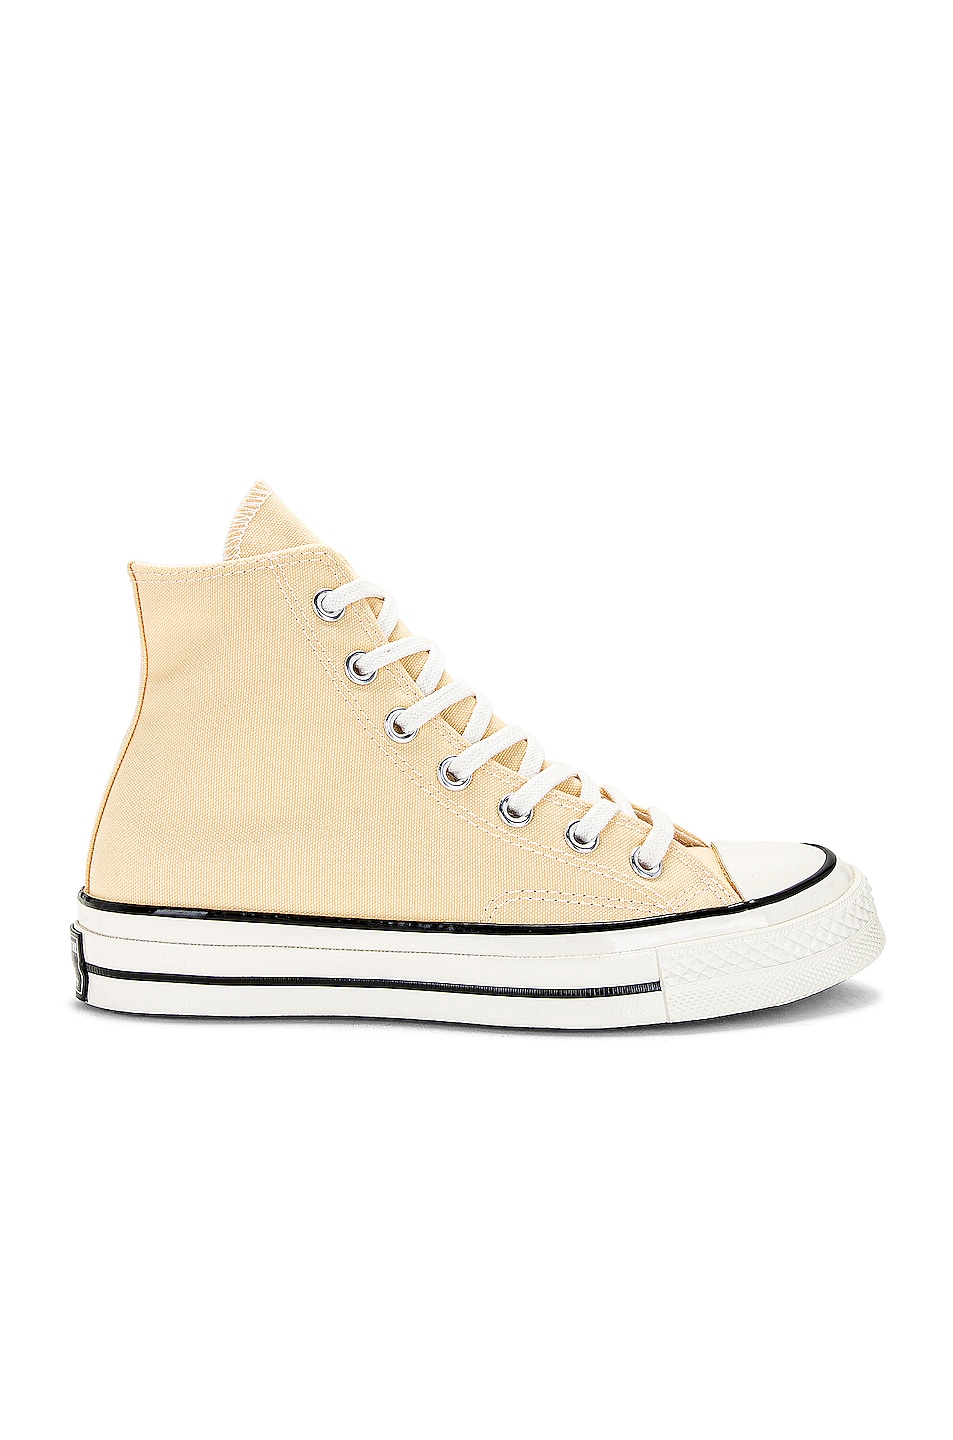 Image 1 of Converse Chuck 70 Sneaker in Sunny Oasis, Egret, & Black